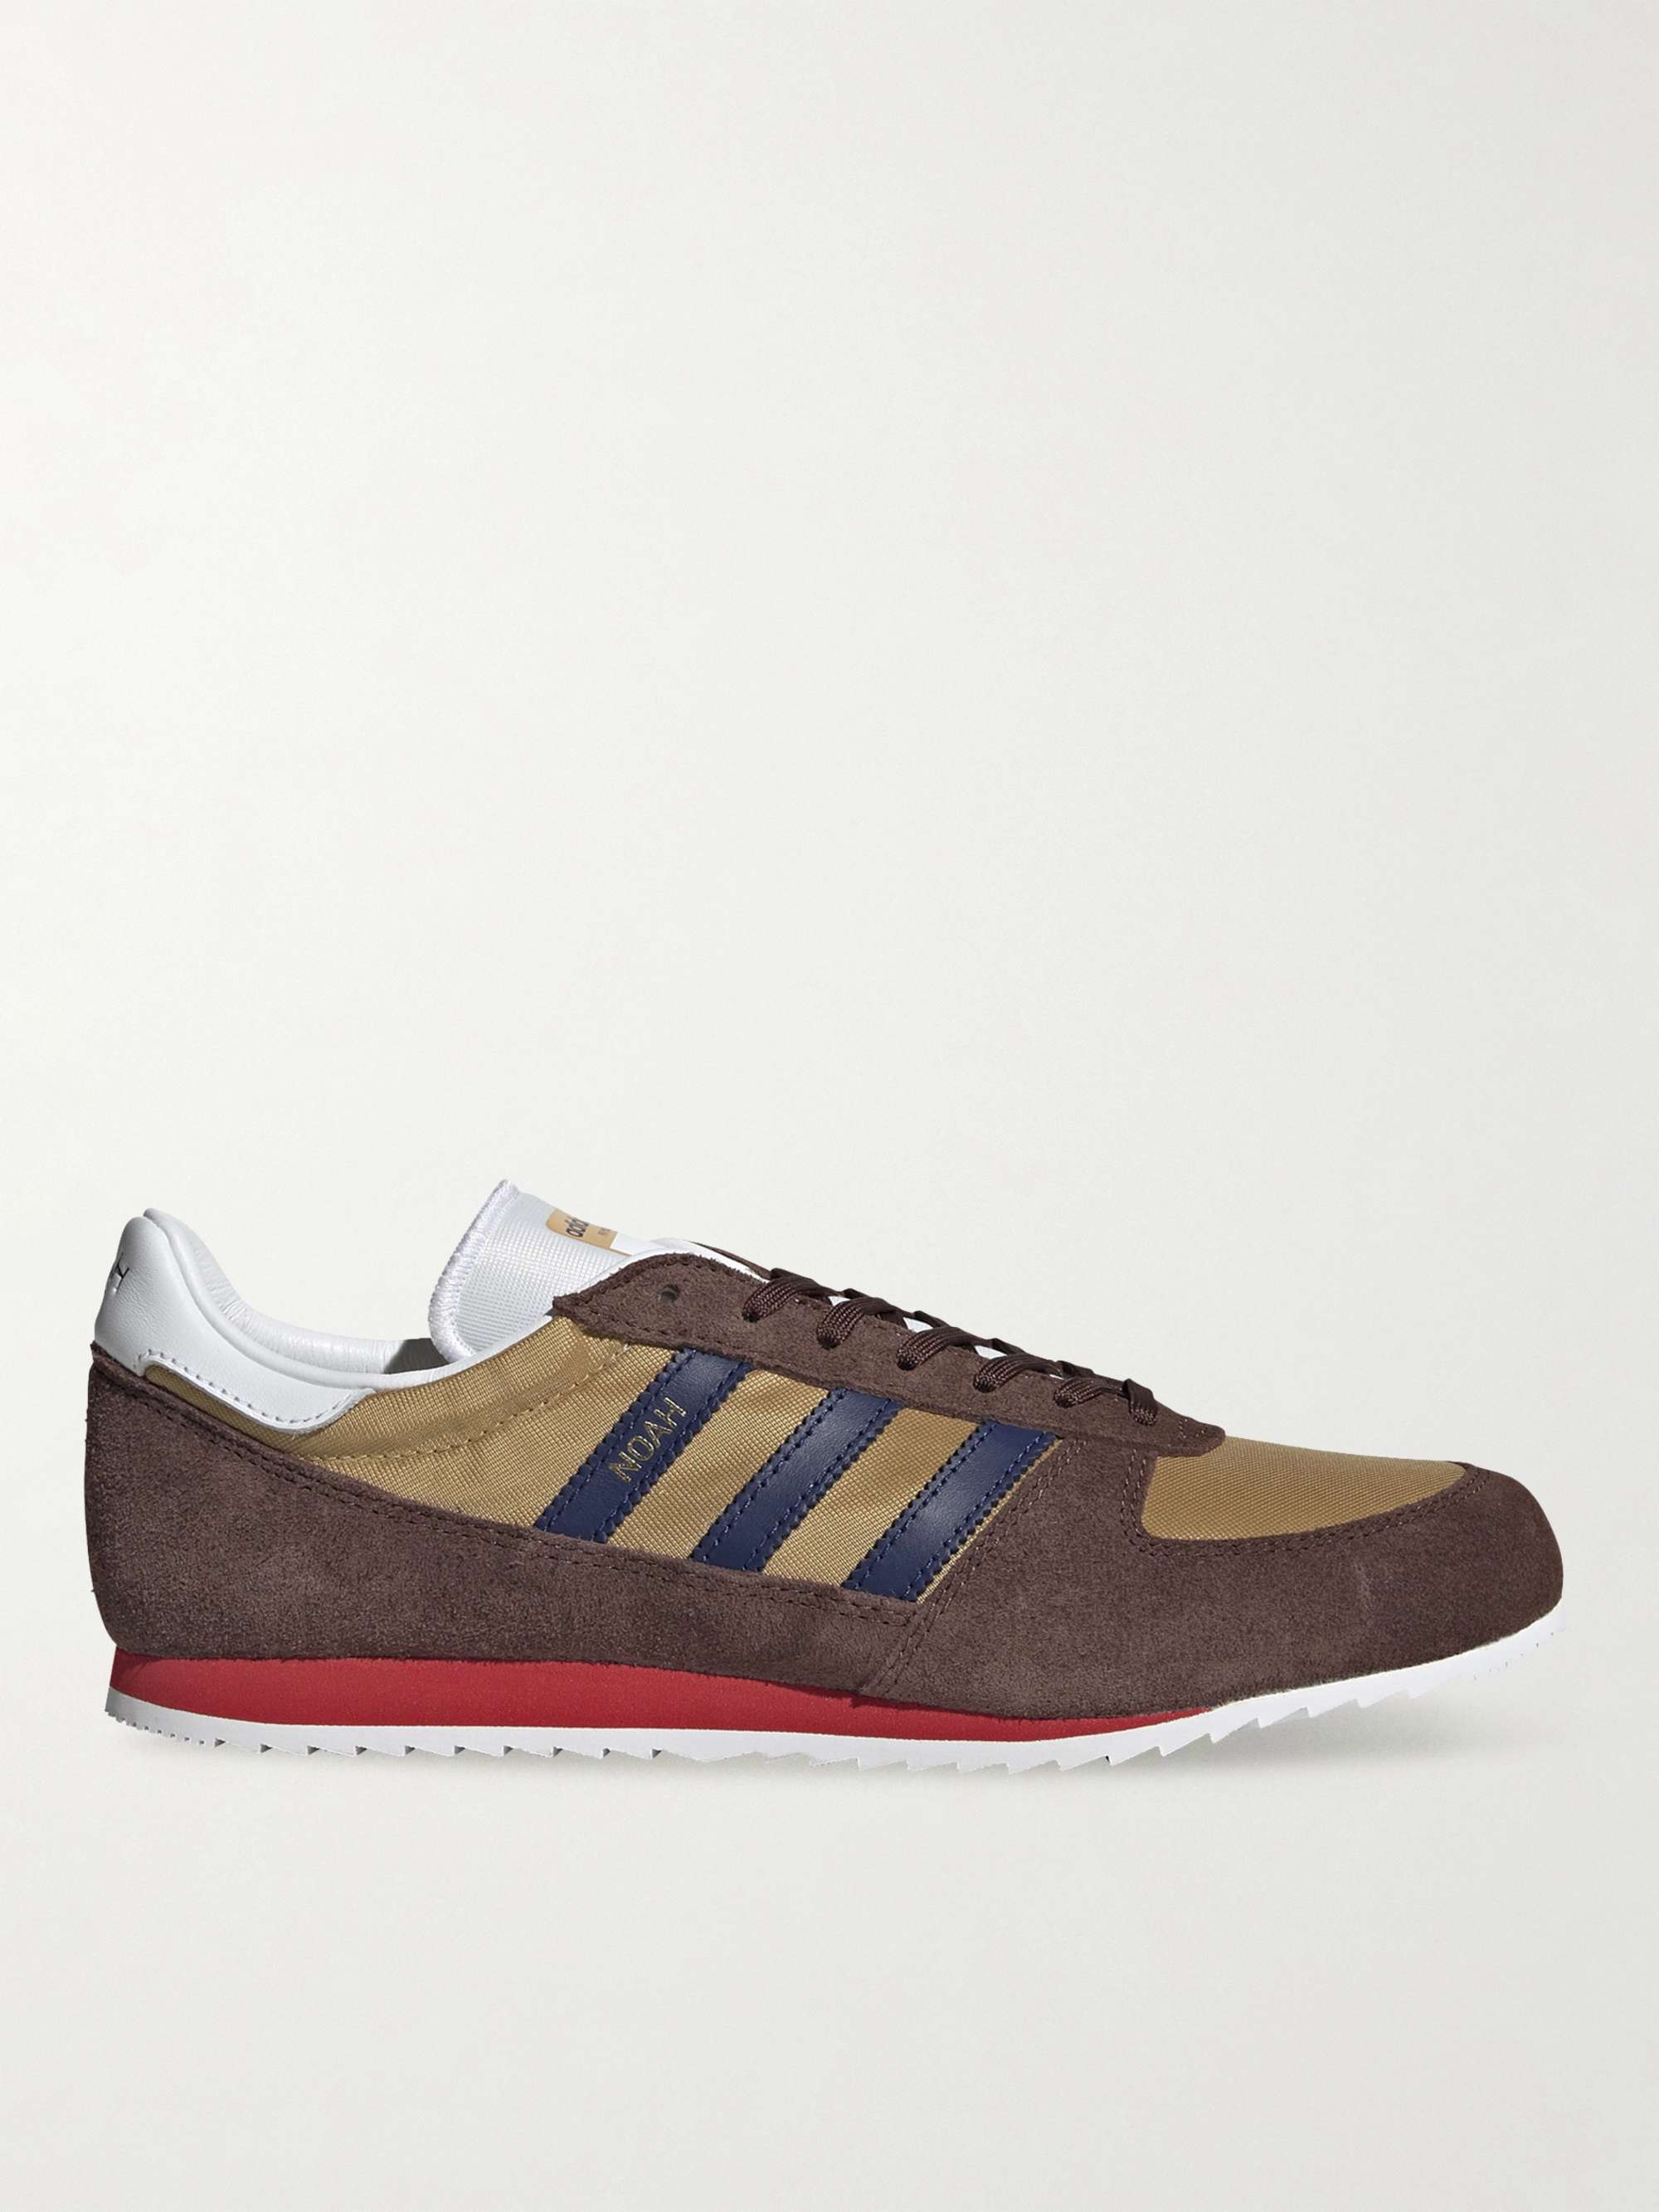 ADIDAS CONSORTIUM + Noah Vintage Runner Leather-Trimmed Mesh and Suede Sneakers